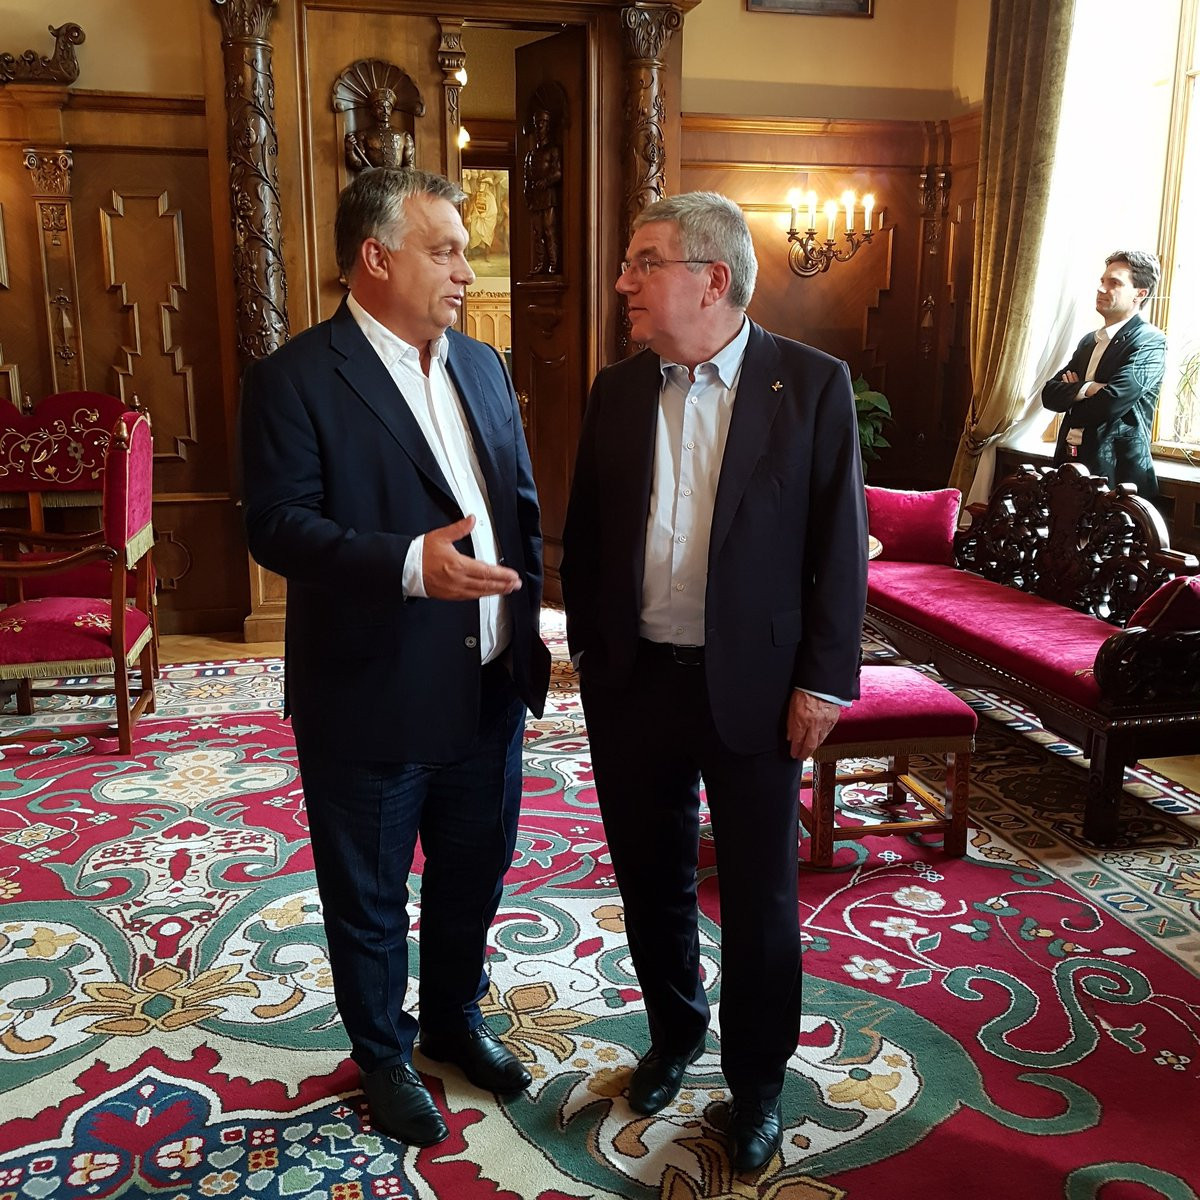 Thomas Bach also met with Hungarian Prime Minister Viktor Orbán during his visit to Budapest ©IOC